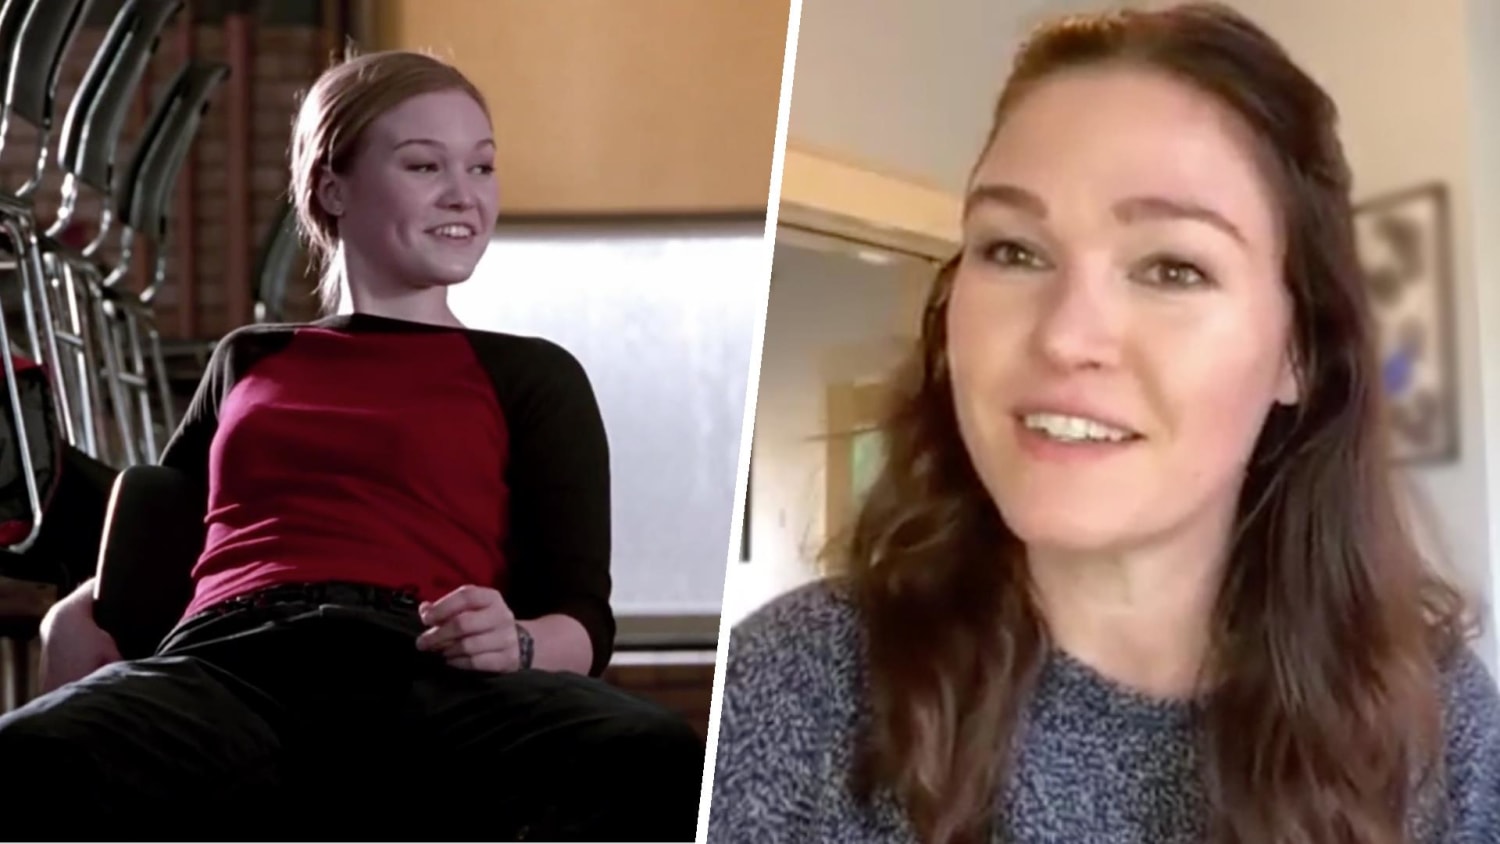 Julia Stiles looks back on 'Save the Last Dance' for 20th anniversary